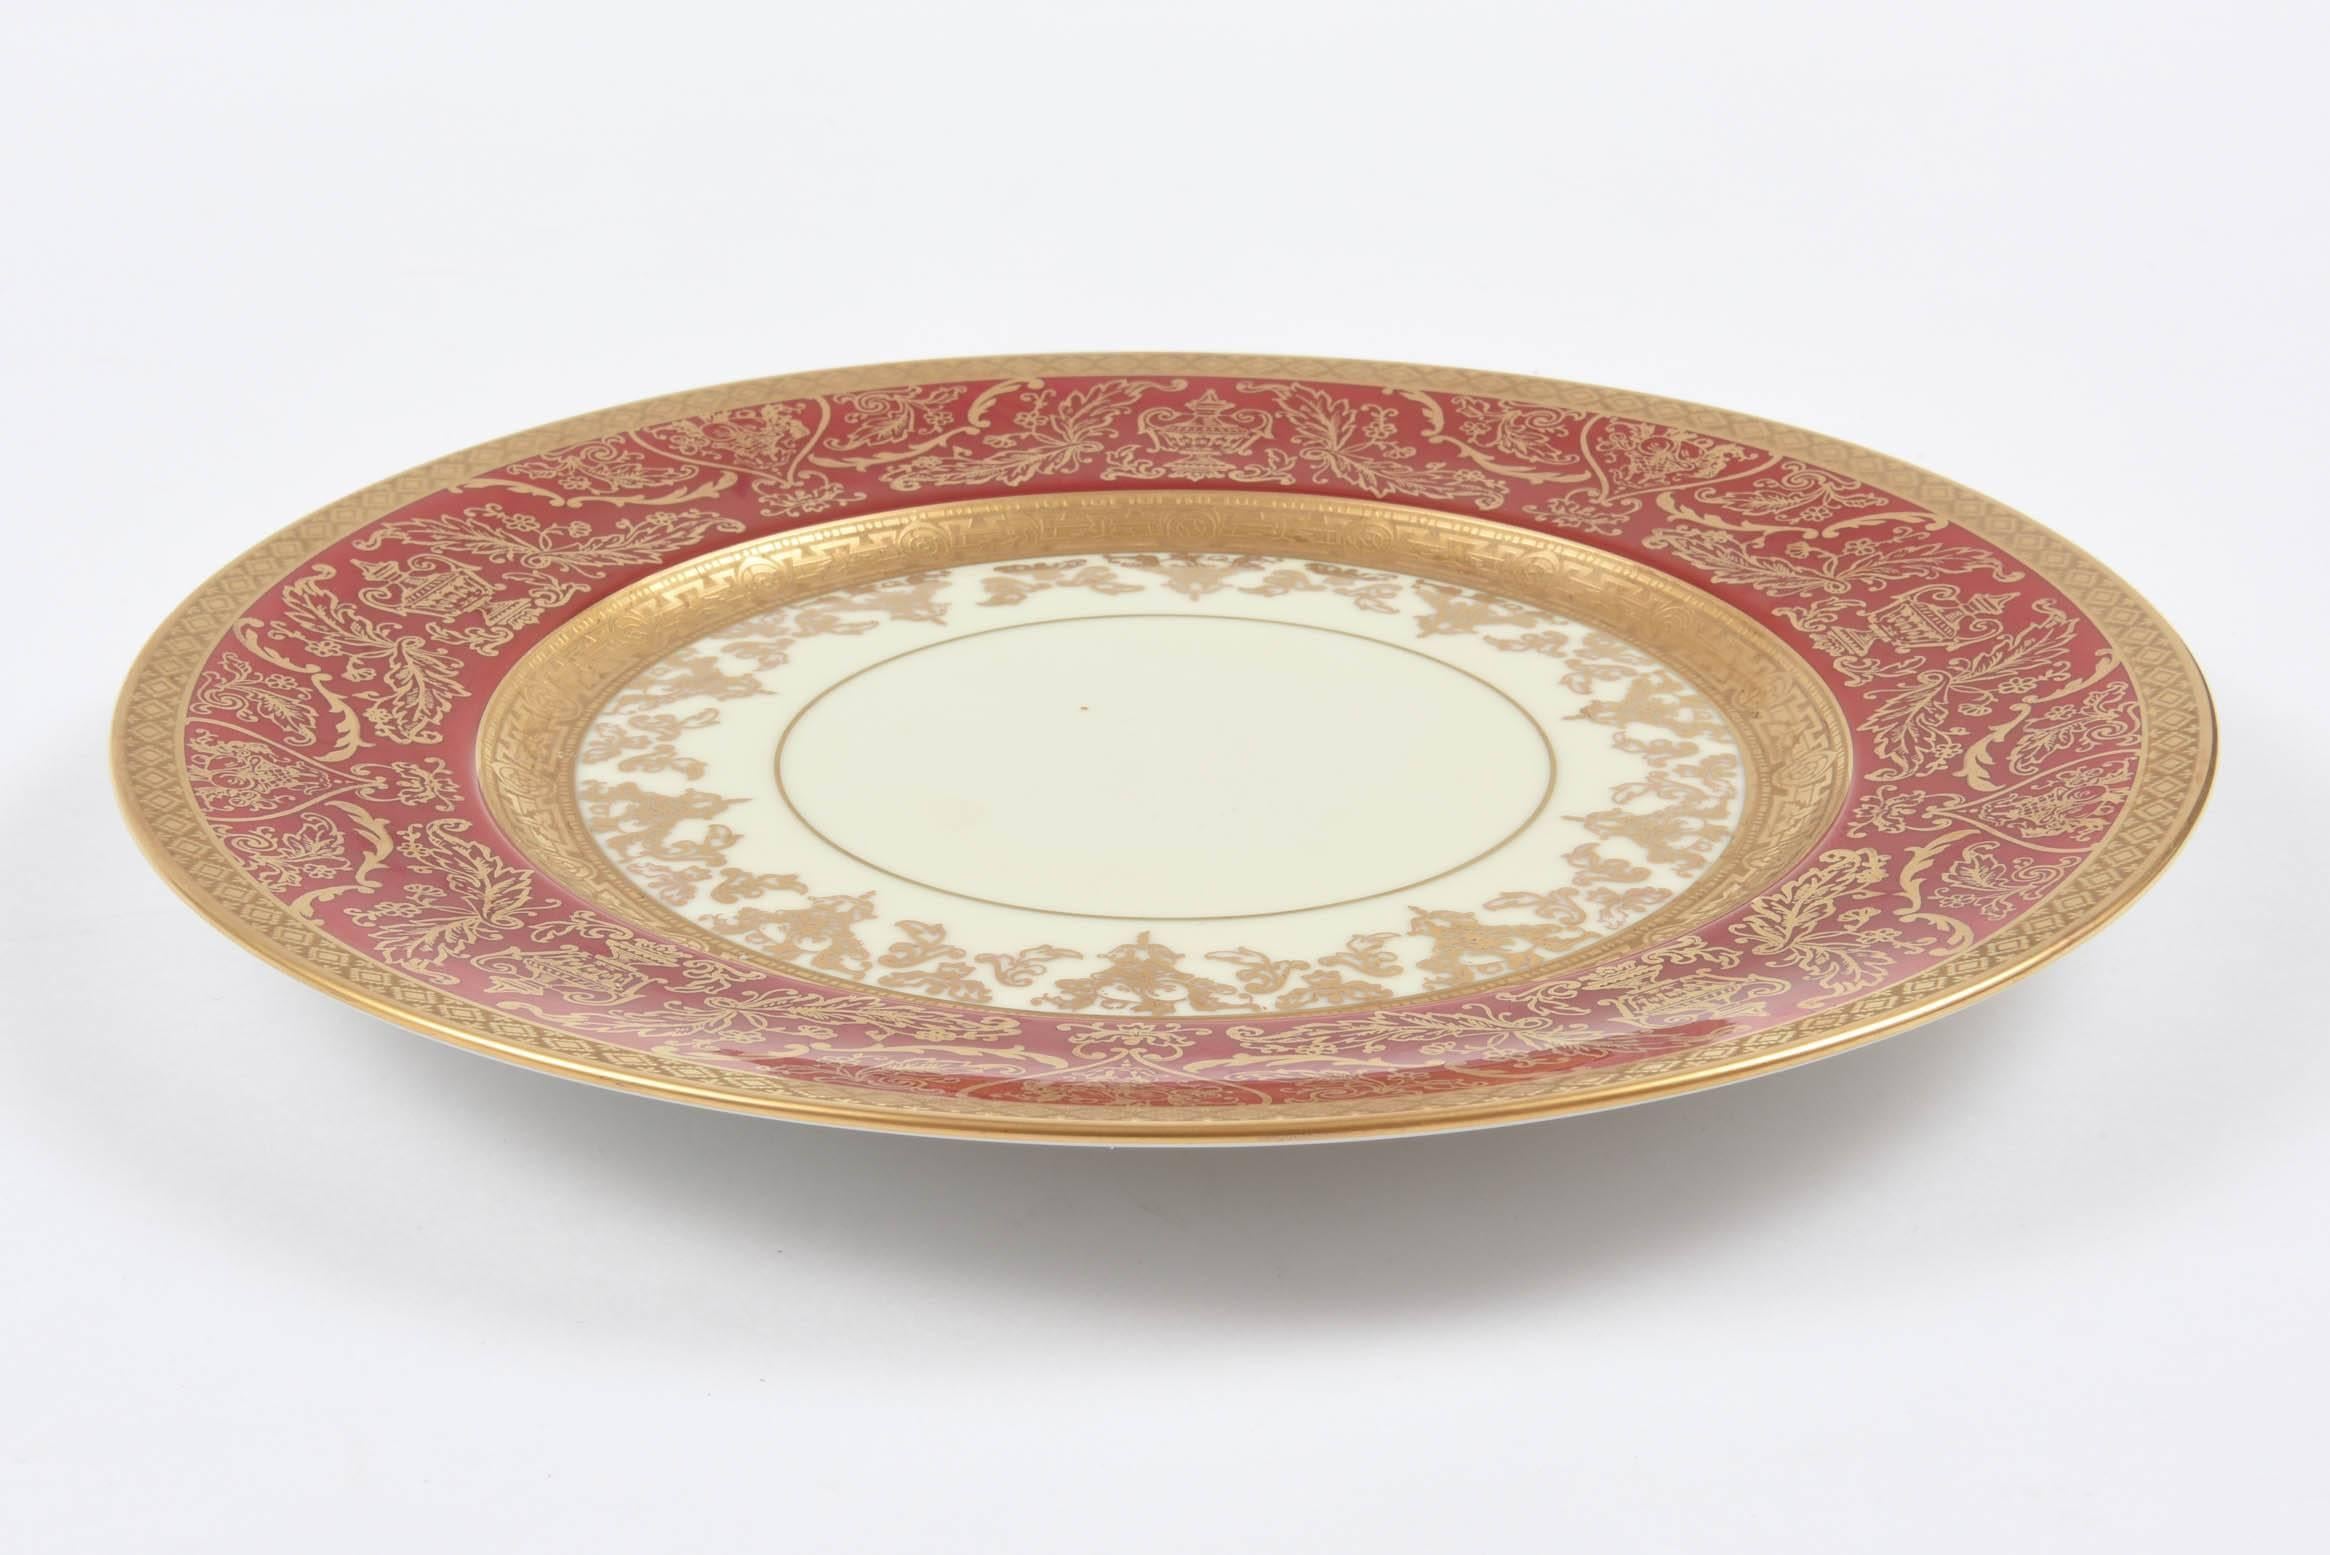 Early 20th Century 12 Impressive Ruby Red & Gold Encrusted Dinner or Presentation Plates, Antique